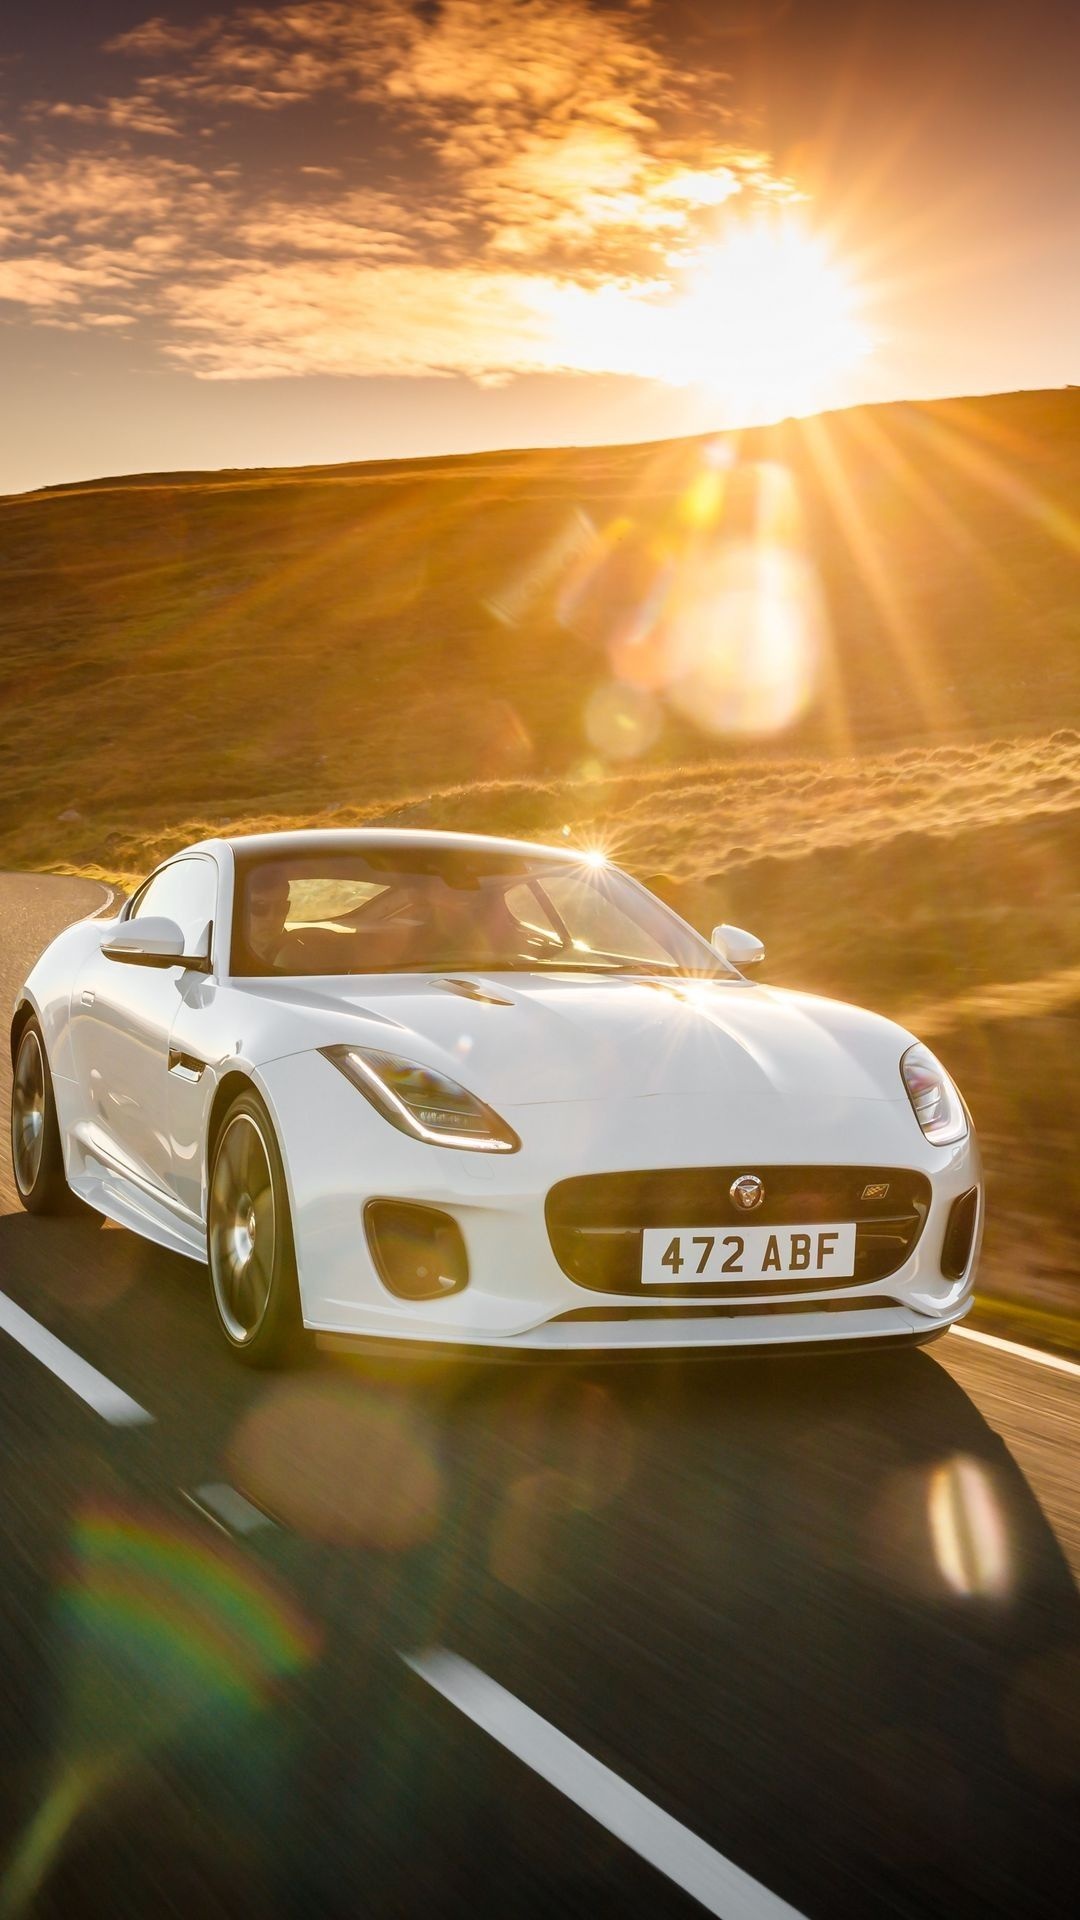 Jaguar F-TYPE, Mobile wallpapers, HD images, Speed and luxury, 1080x1920 Full HD Phone